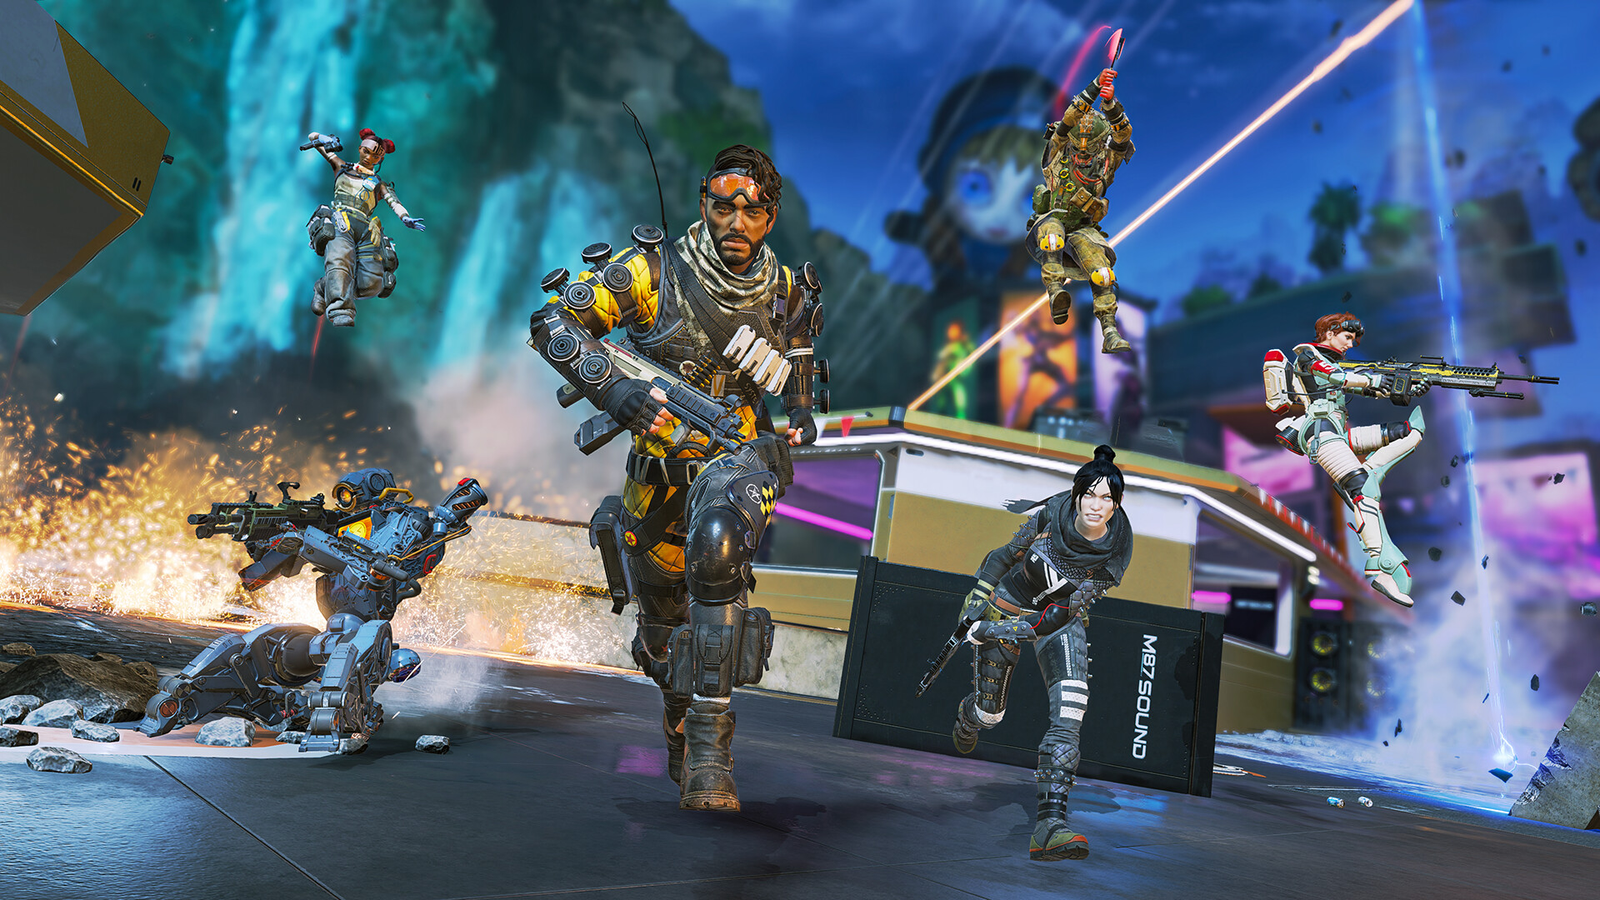 Apex Legends Mobile shutting down in May, EA and Respawn announce